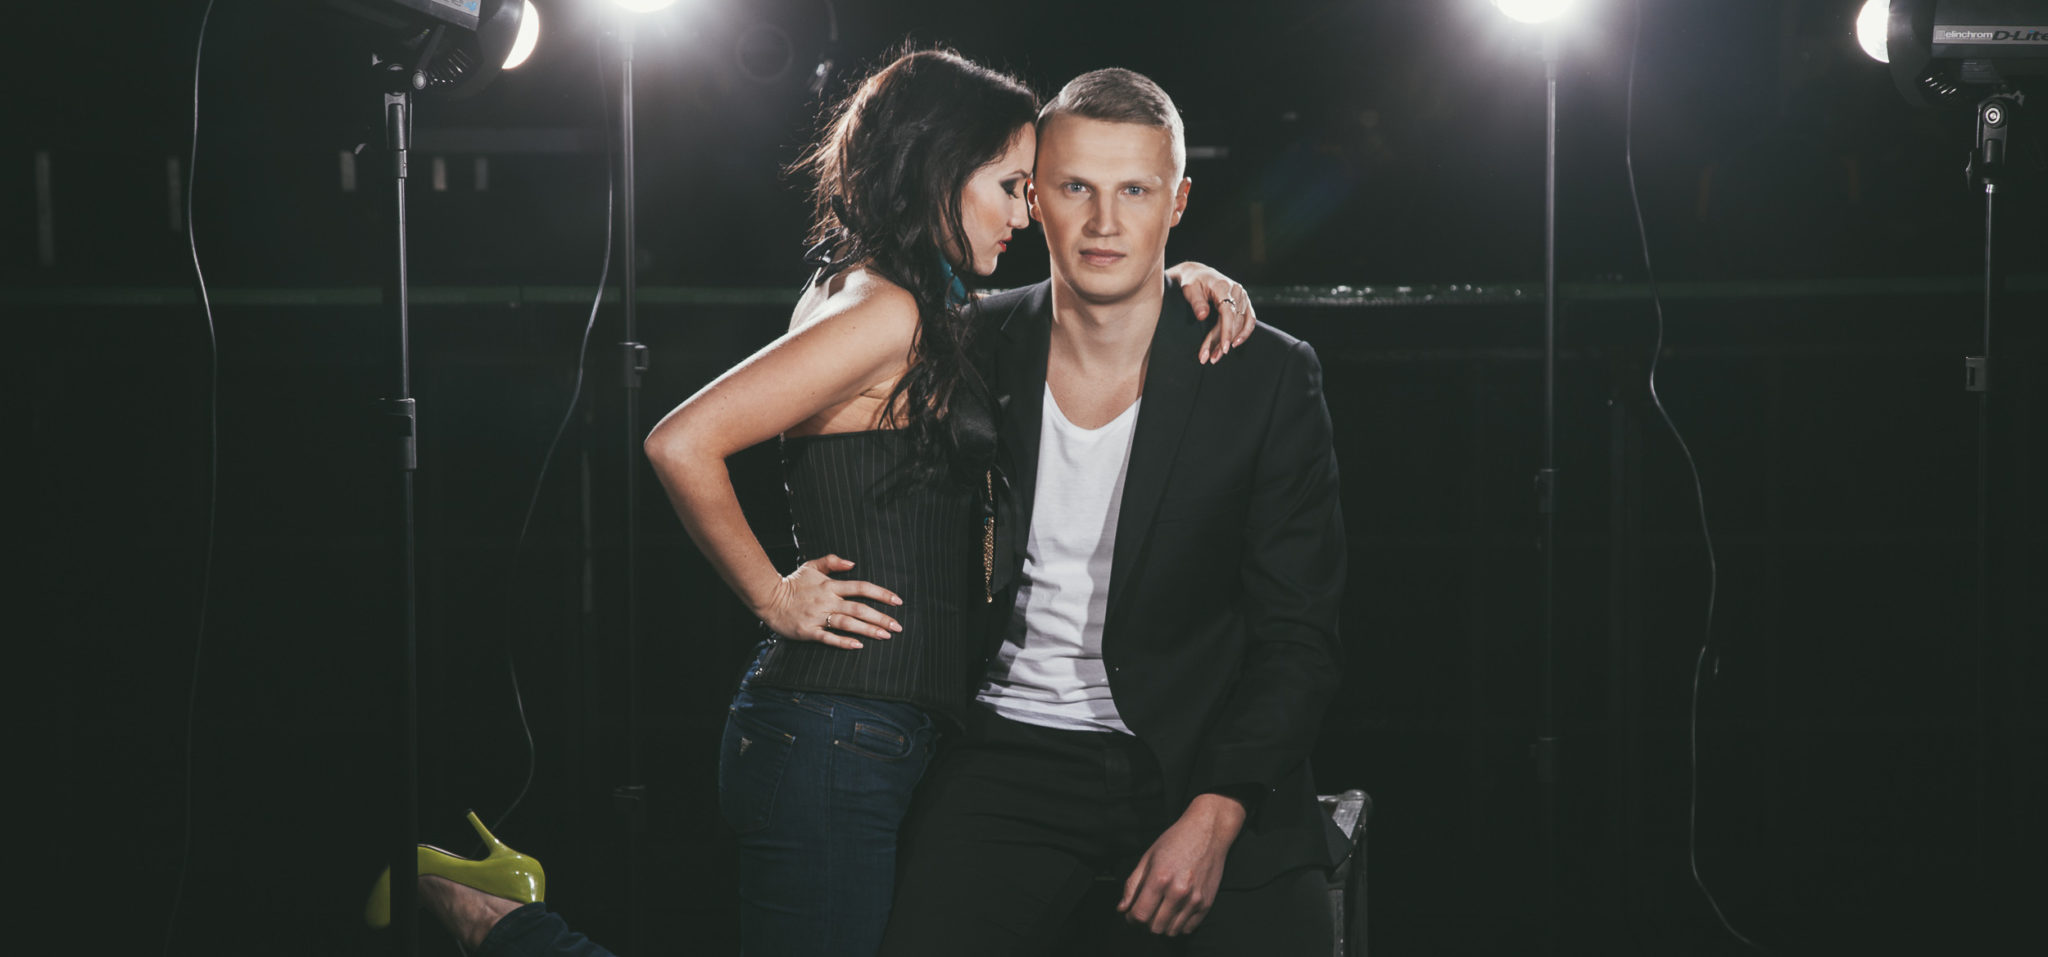 Demie feat. Janice: “We did not write the song “Kuum” especially for Eesti Laul” (Estonian participants – Interview)